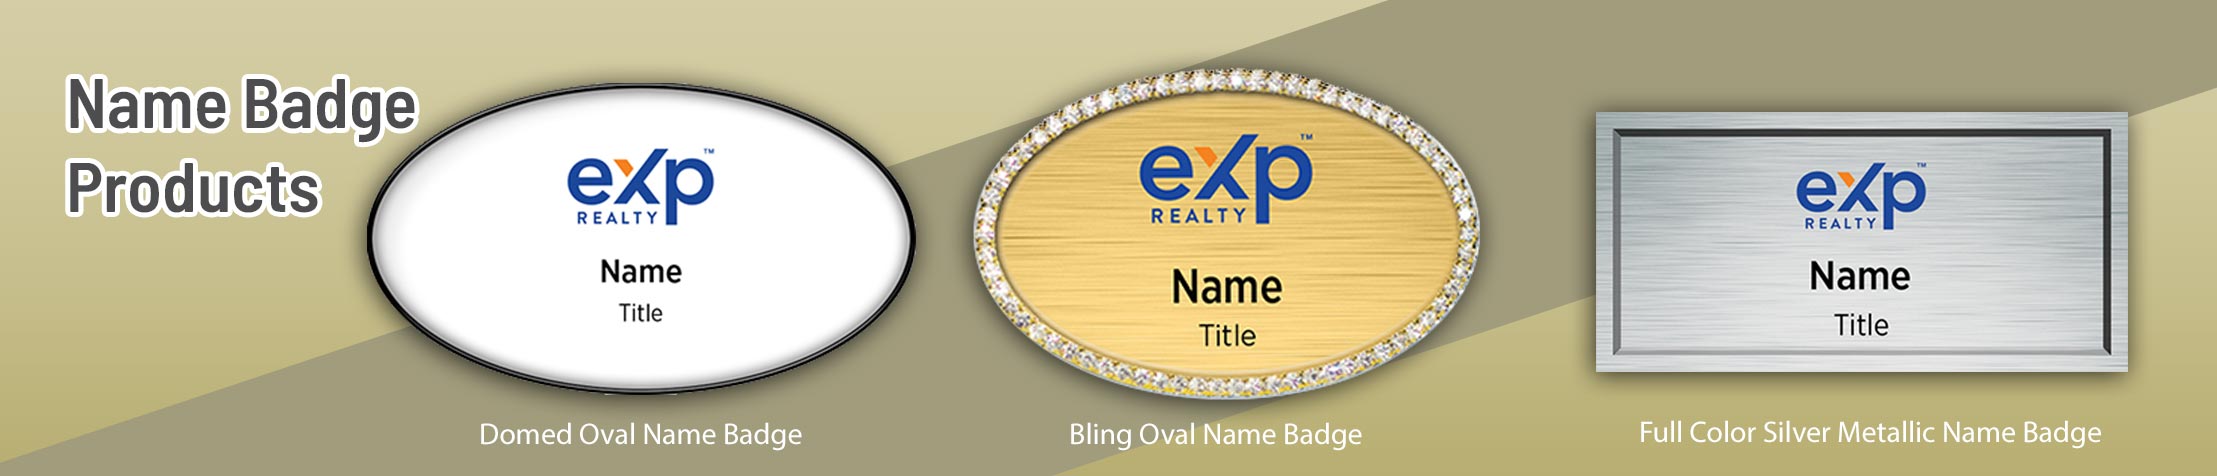 eXp Realty Real Estate Name Badge Products -  Name Tags for Realtors | Sparkprint.com